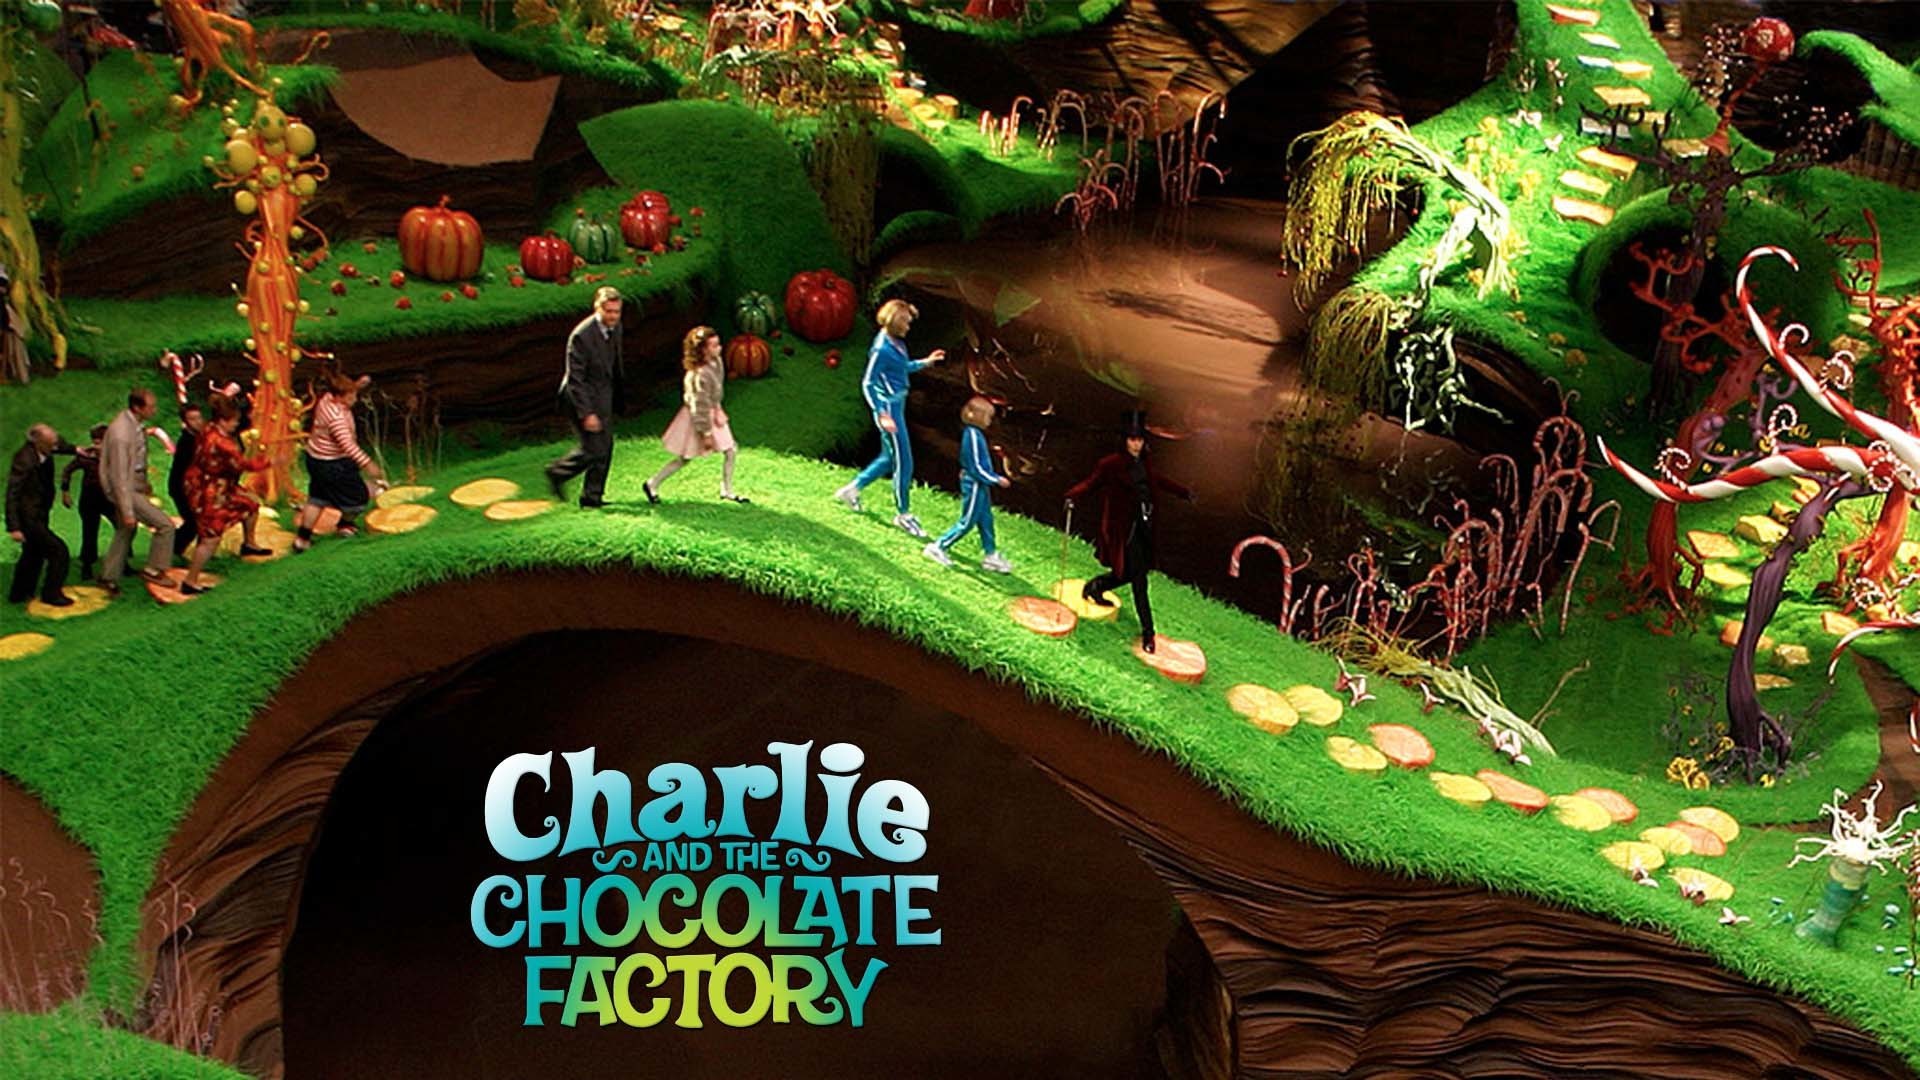 [96+] Charlie And The Chocolate Factory Wallpapers on WallpaperSafari